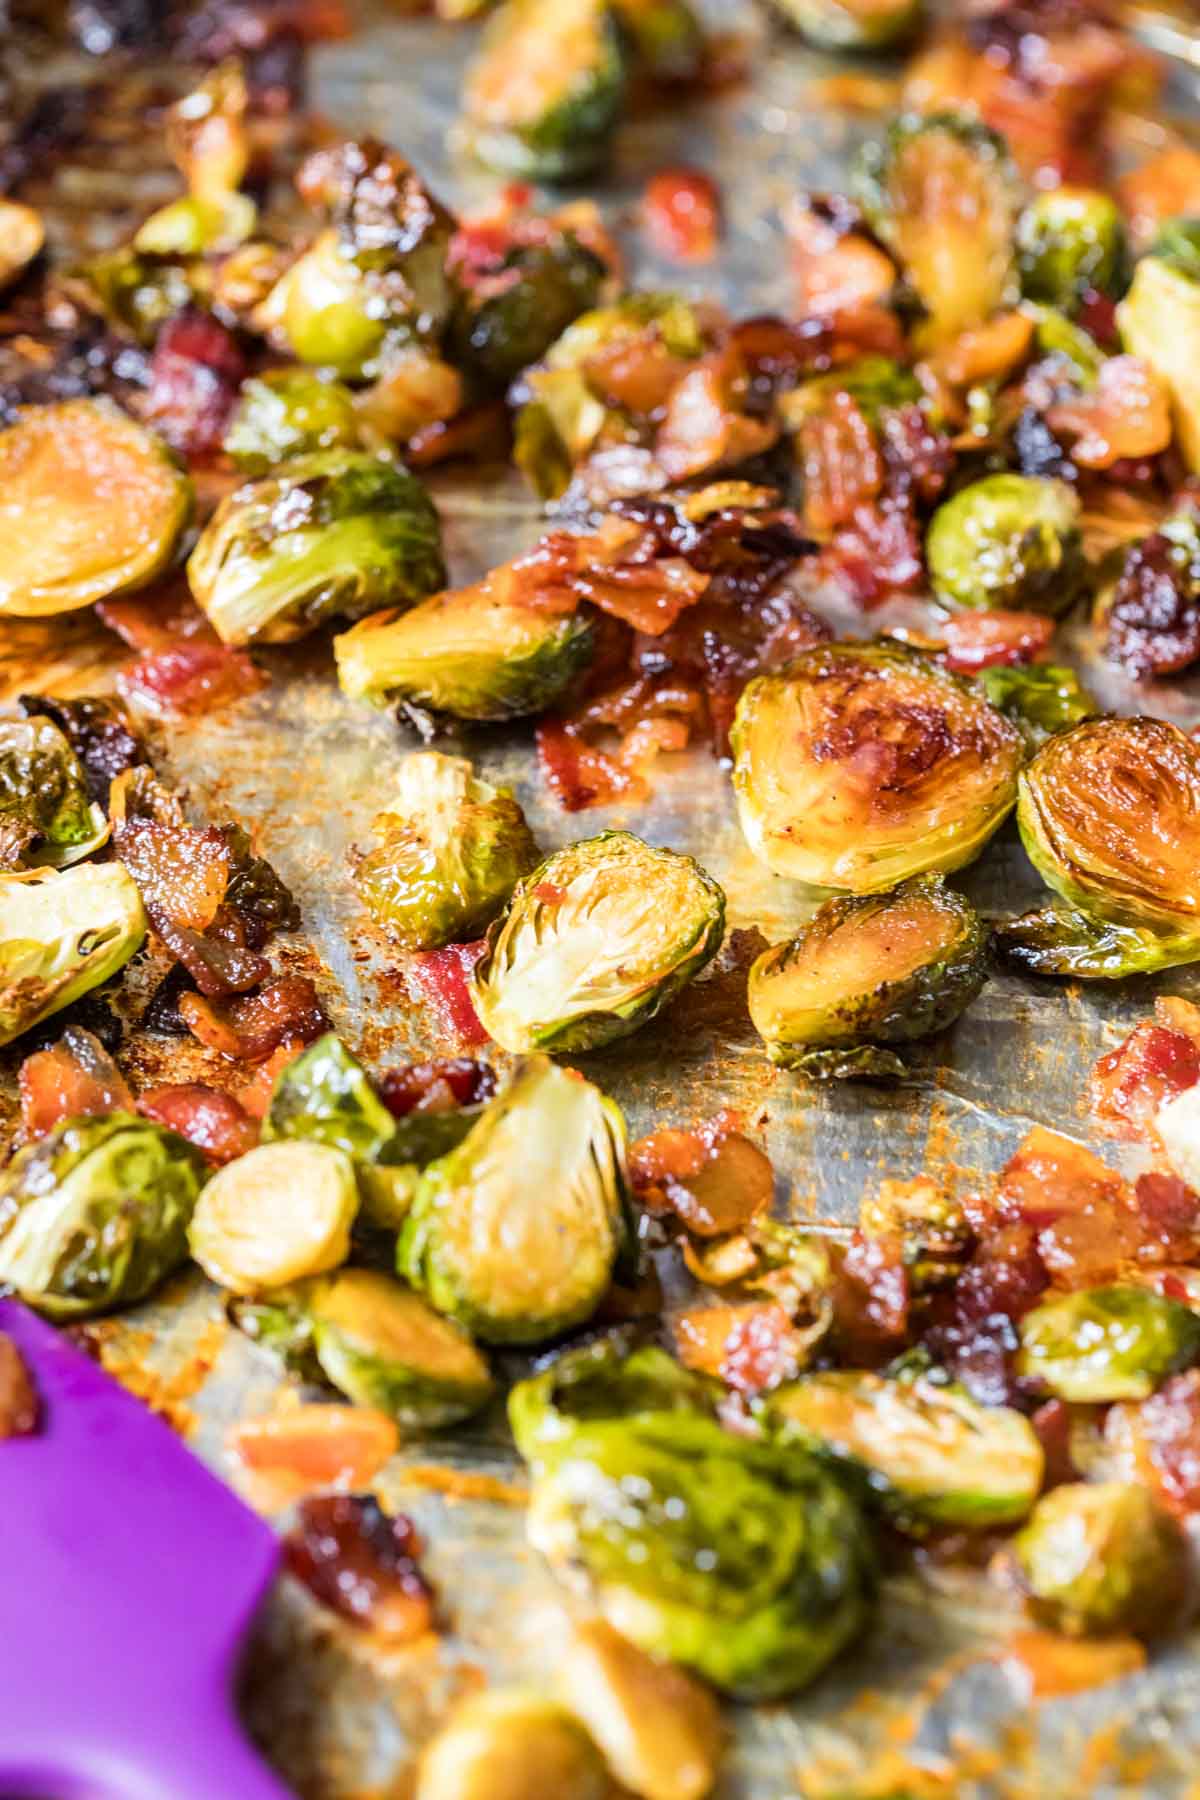 Crispy roasted brussels sprouts made with bacon and maple syrup on a baking sheet.